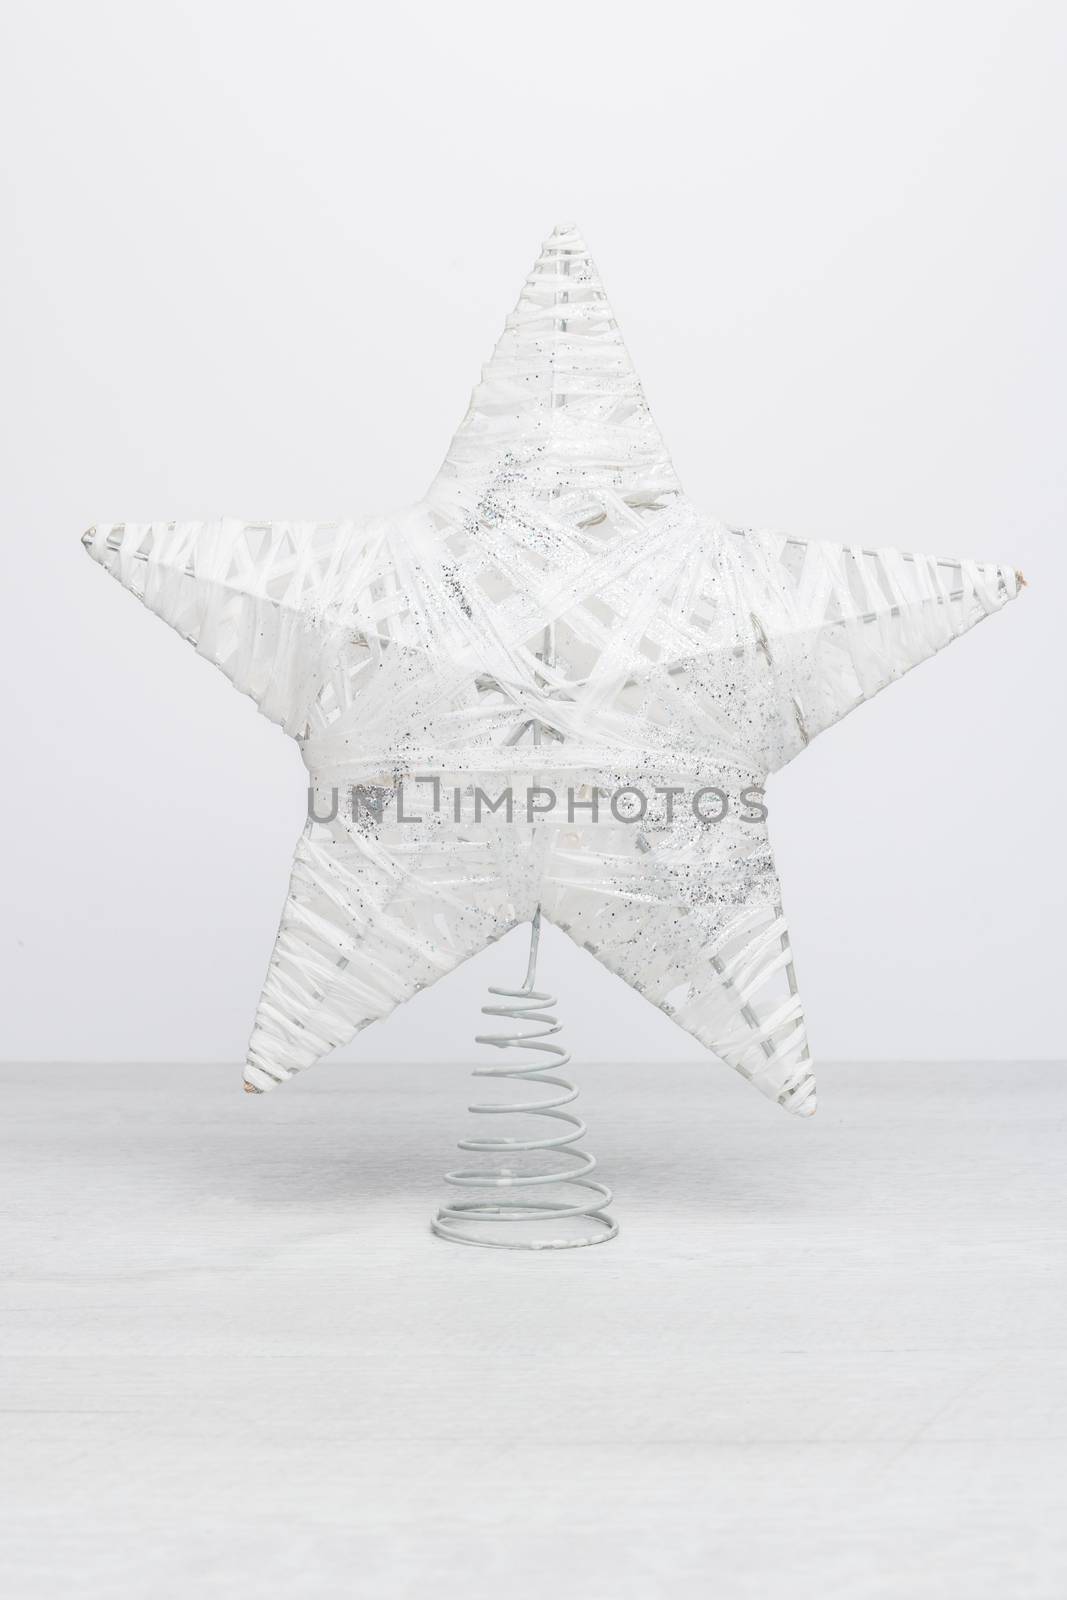 White glittering star shaped Christmas. Ornament on rustic white table background